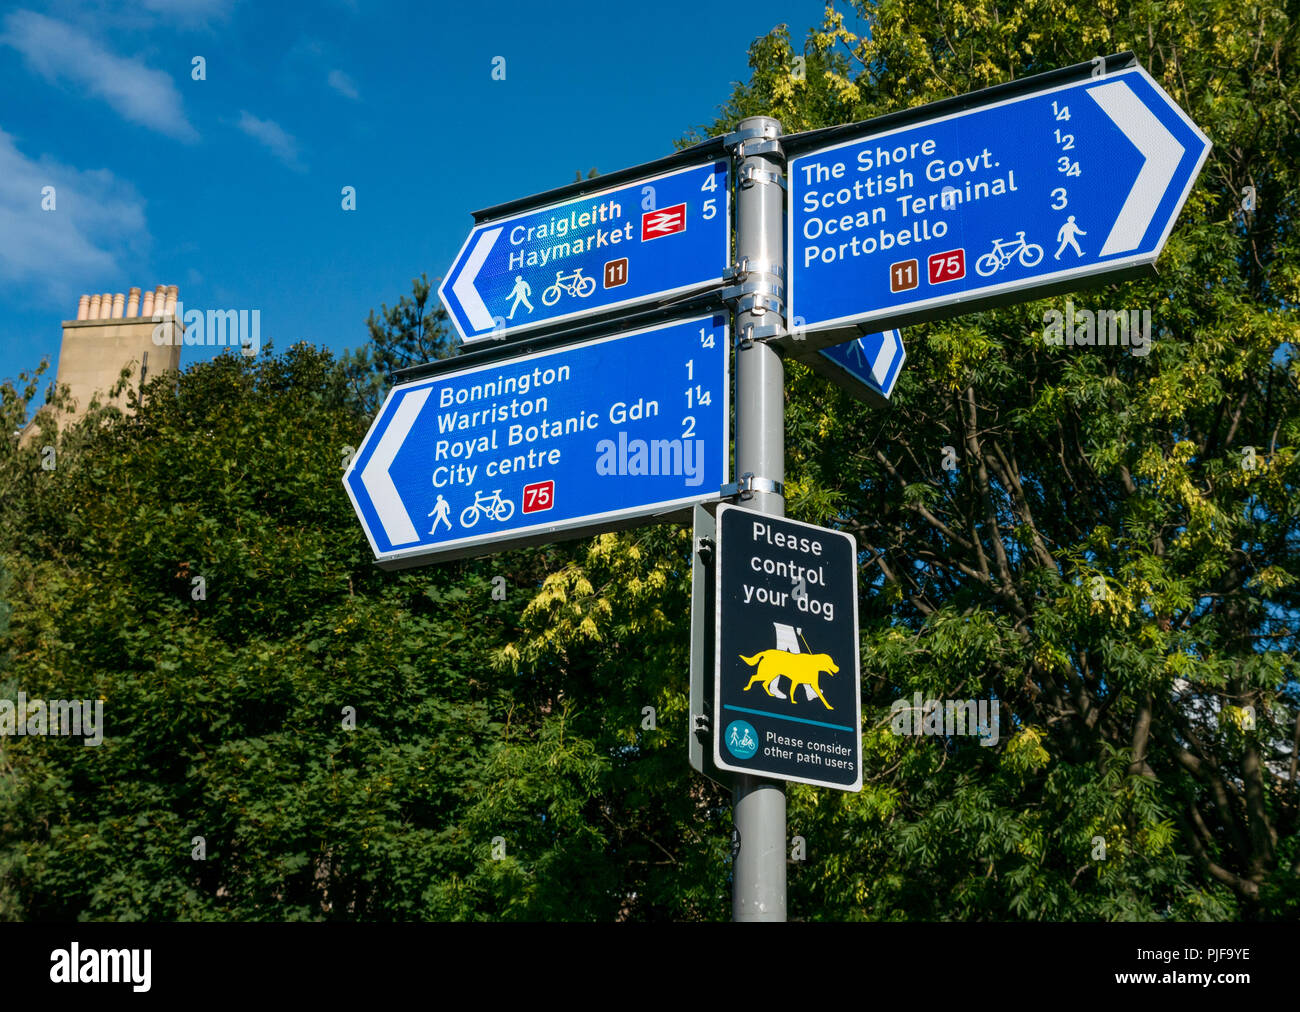 Water of Leith footpath and cycle route direction signs with control dog notice on sunny day Leith, Edinburgh, Scotland, UK Stock Photo